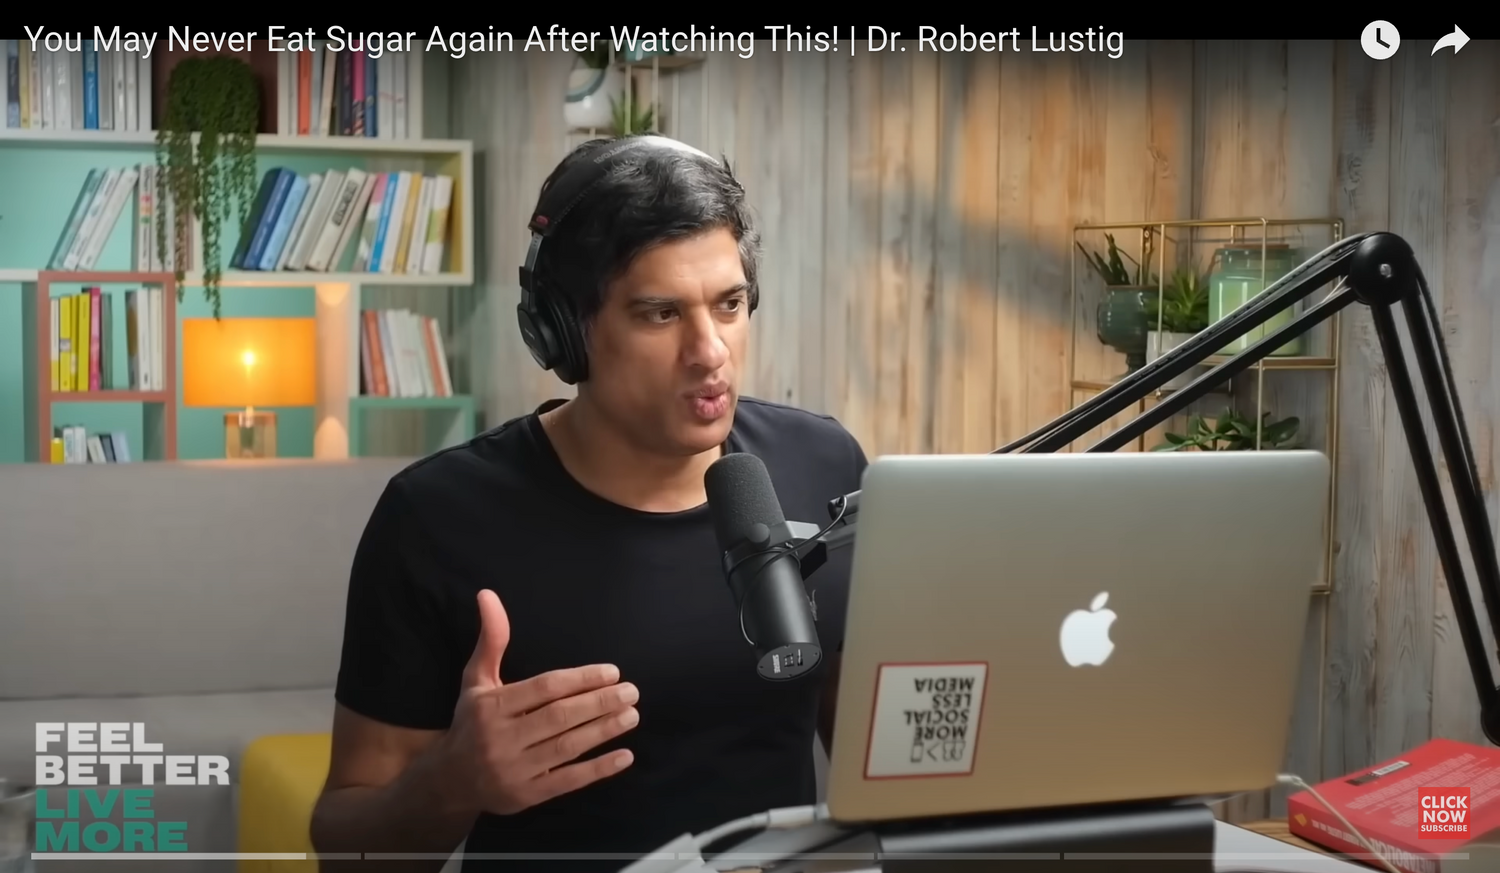 "You May Never Eat Sugar Again After Watching This! | Dr. Robert Lustig"